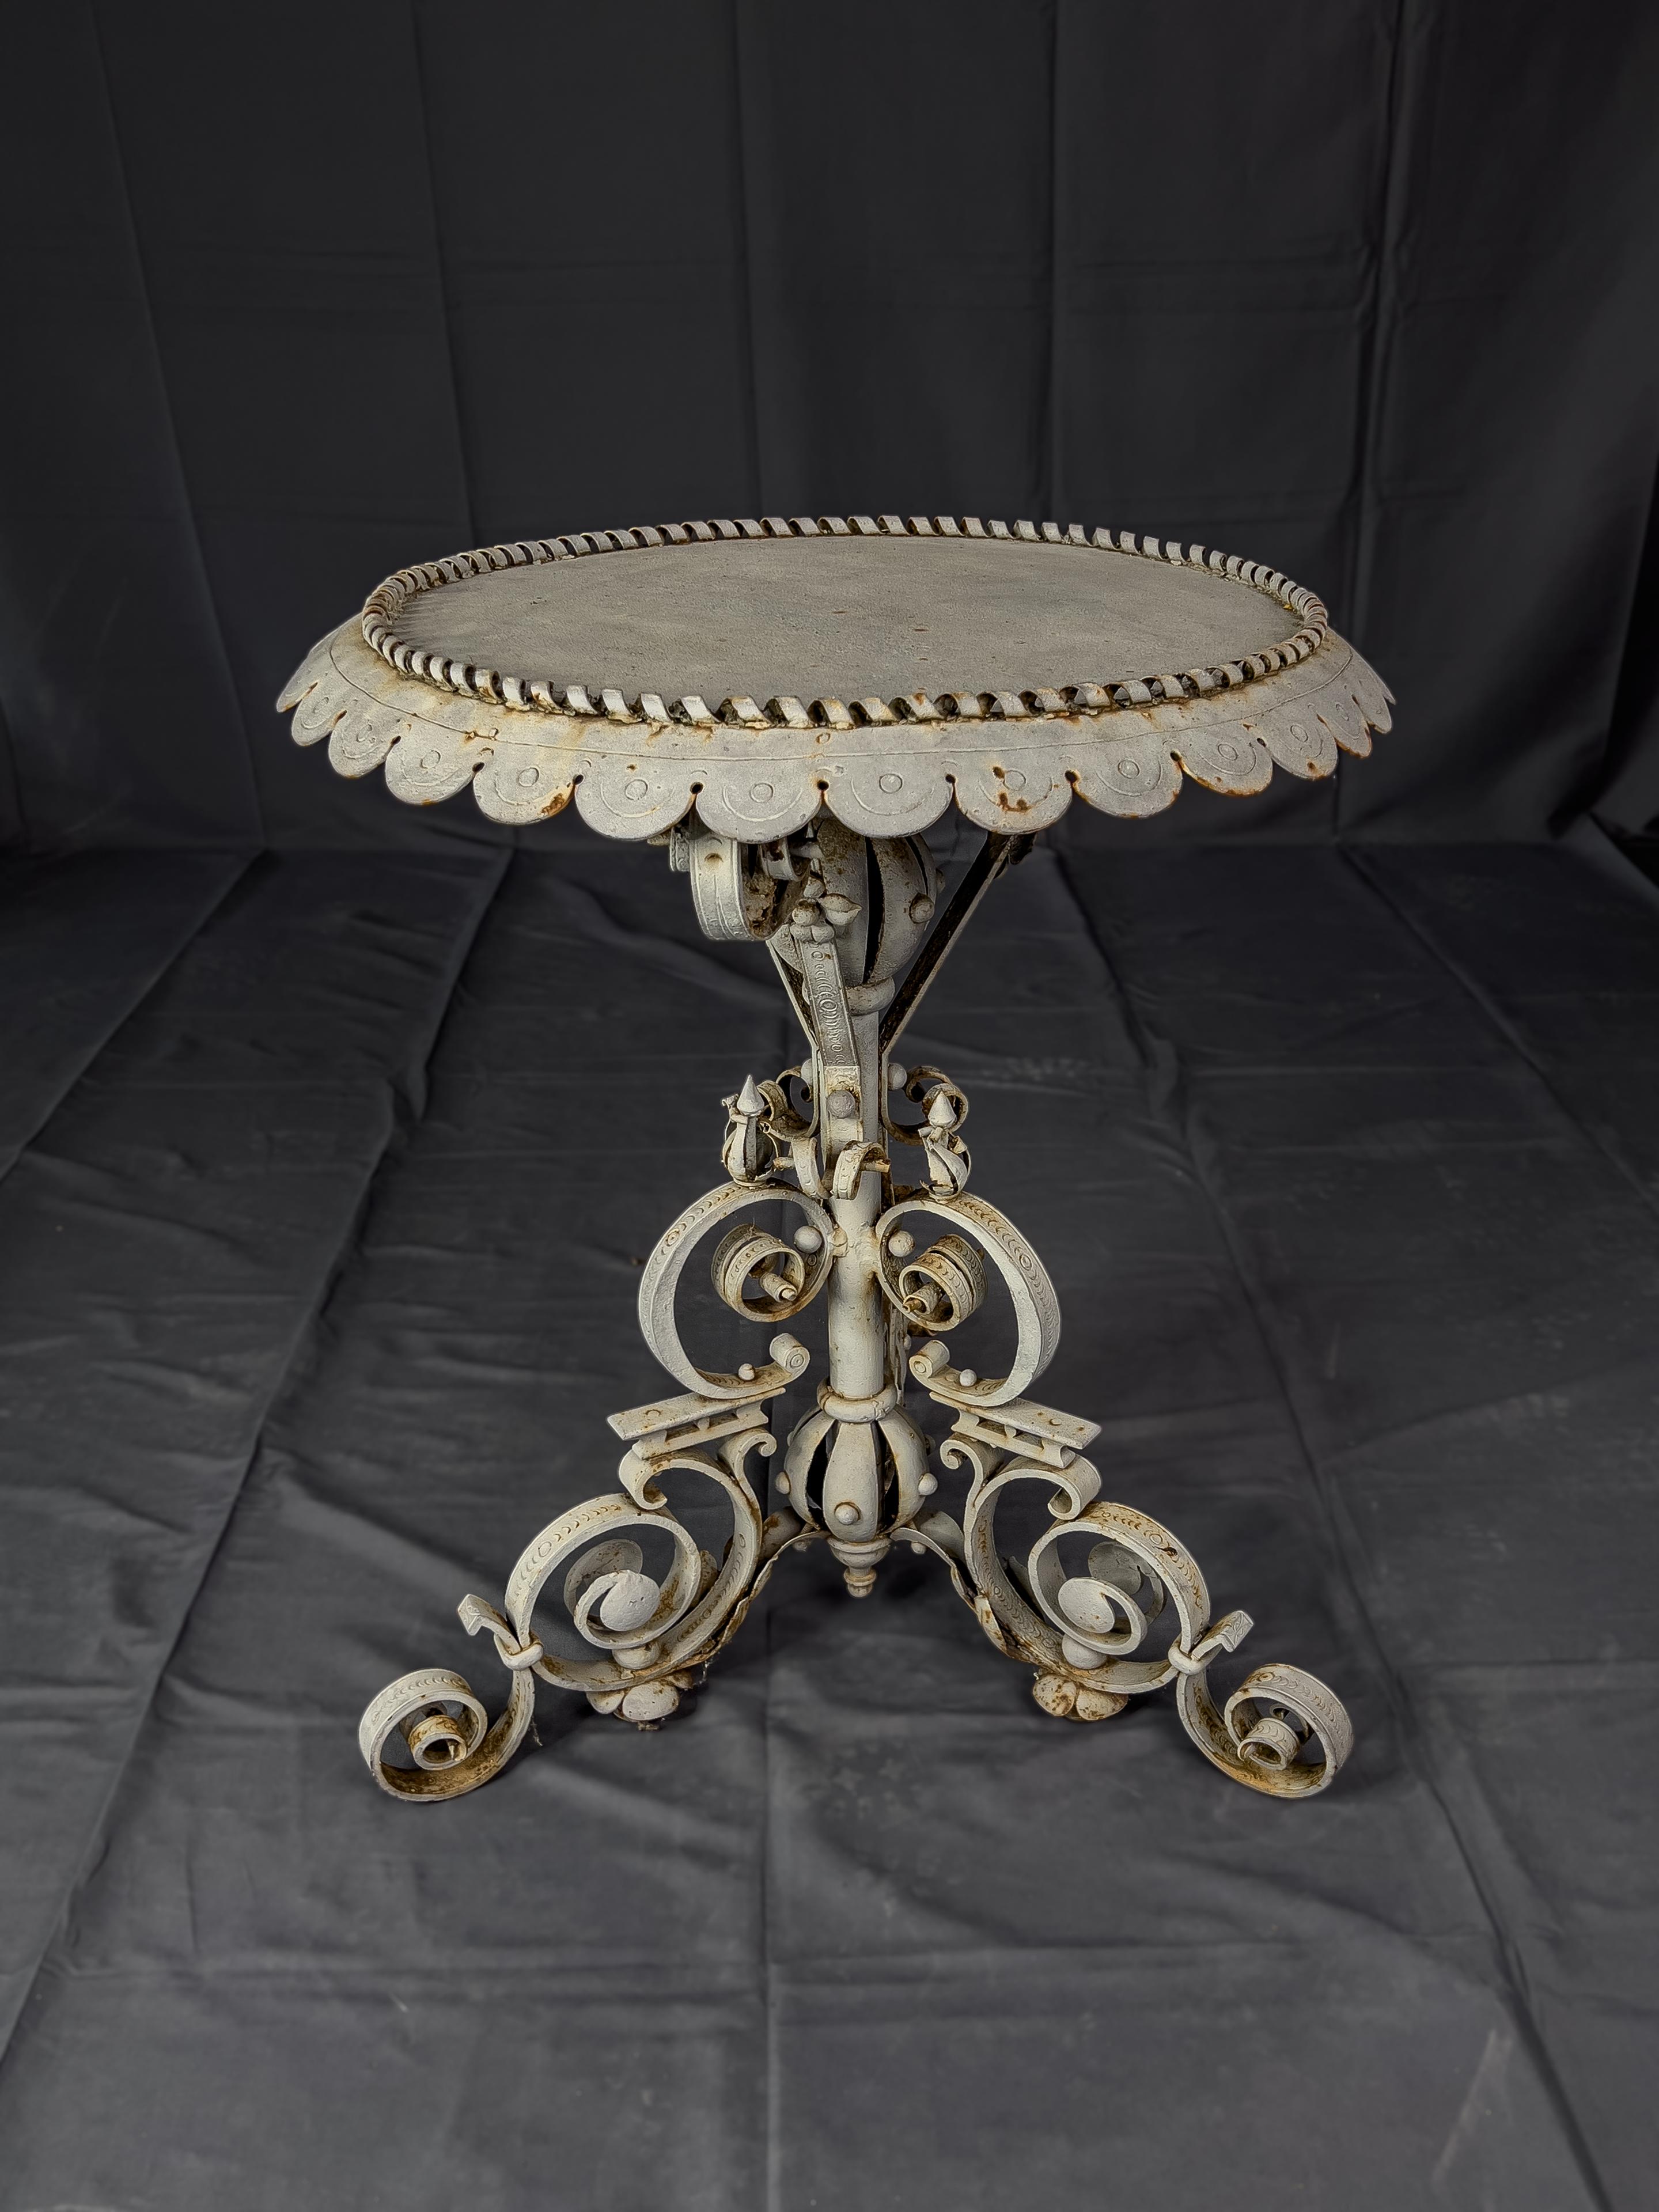 Baroque style painted wrought iron side table with a tripod pedestal base that has elaborate turned and stamped decoration. The side table has a scalloped edge top and a twisted metal gallery rail.  This is a unique table which makes a great 